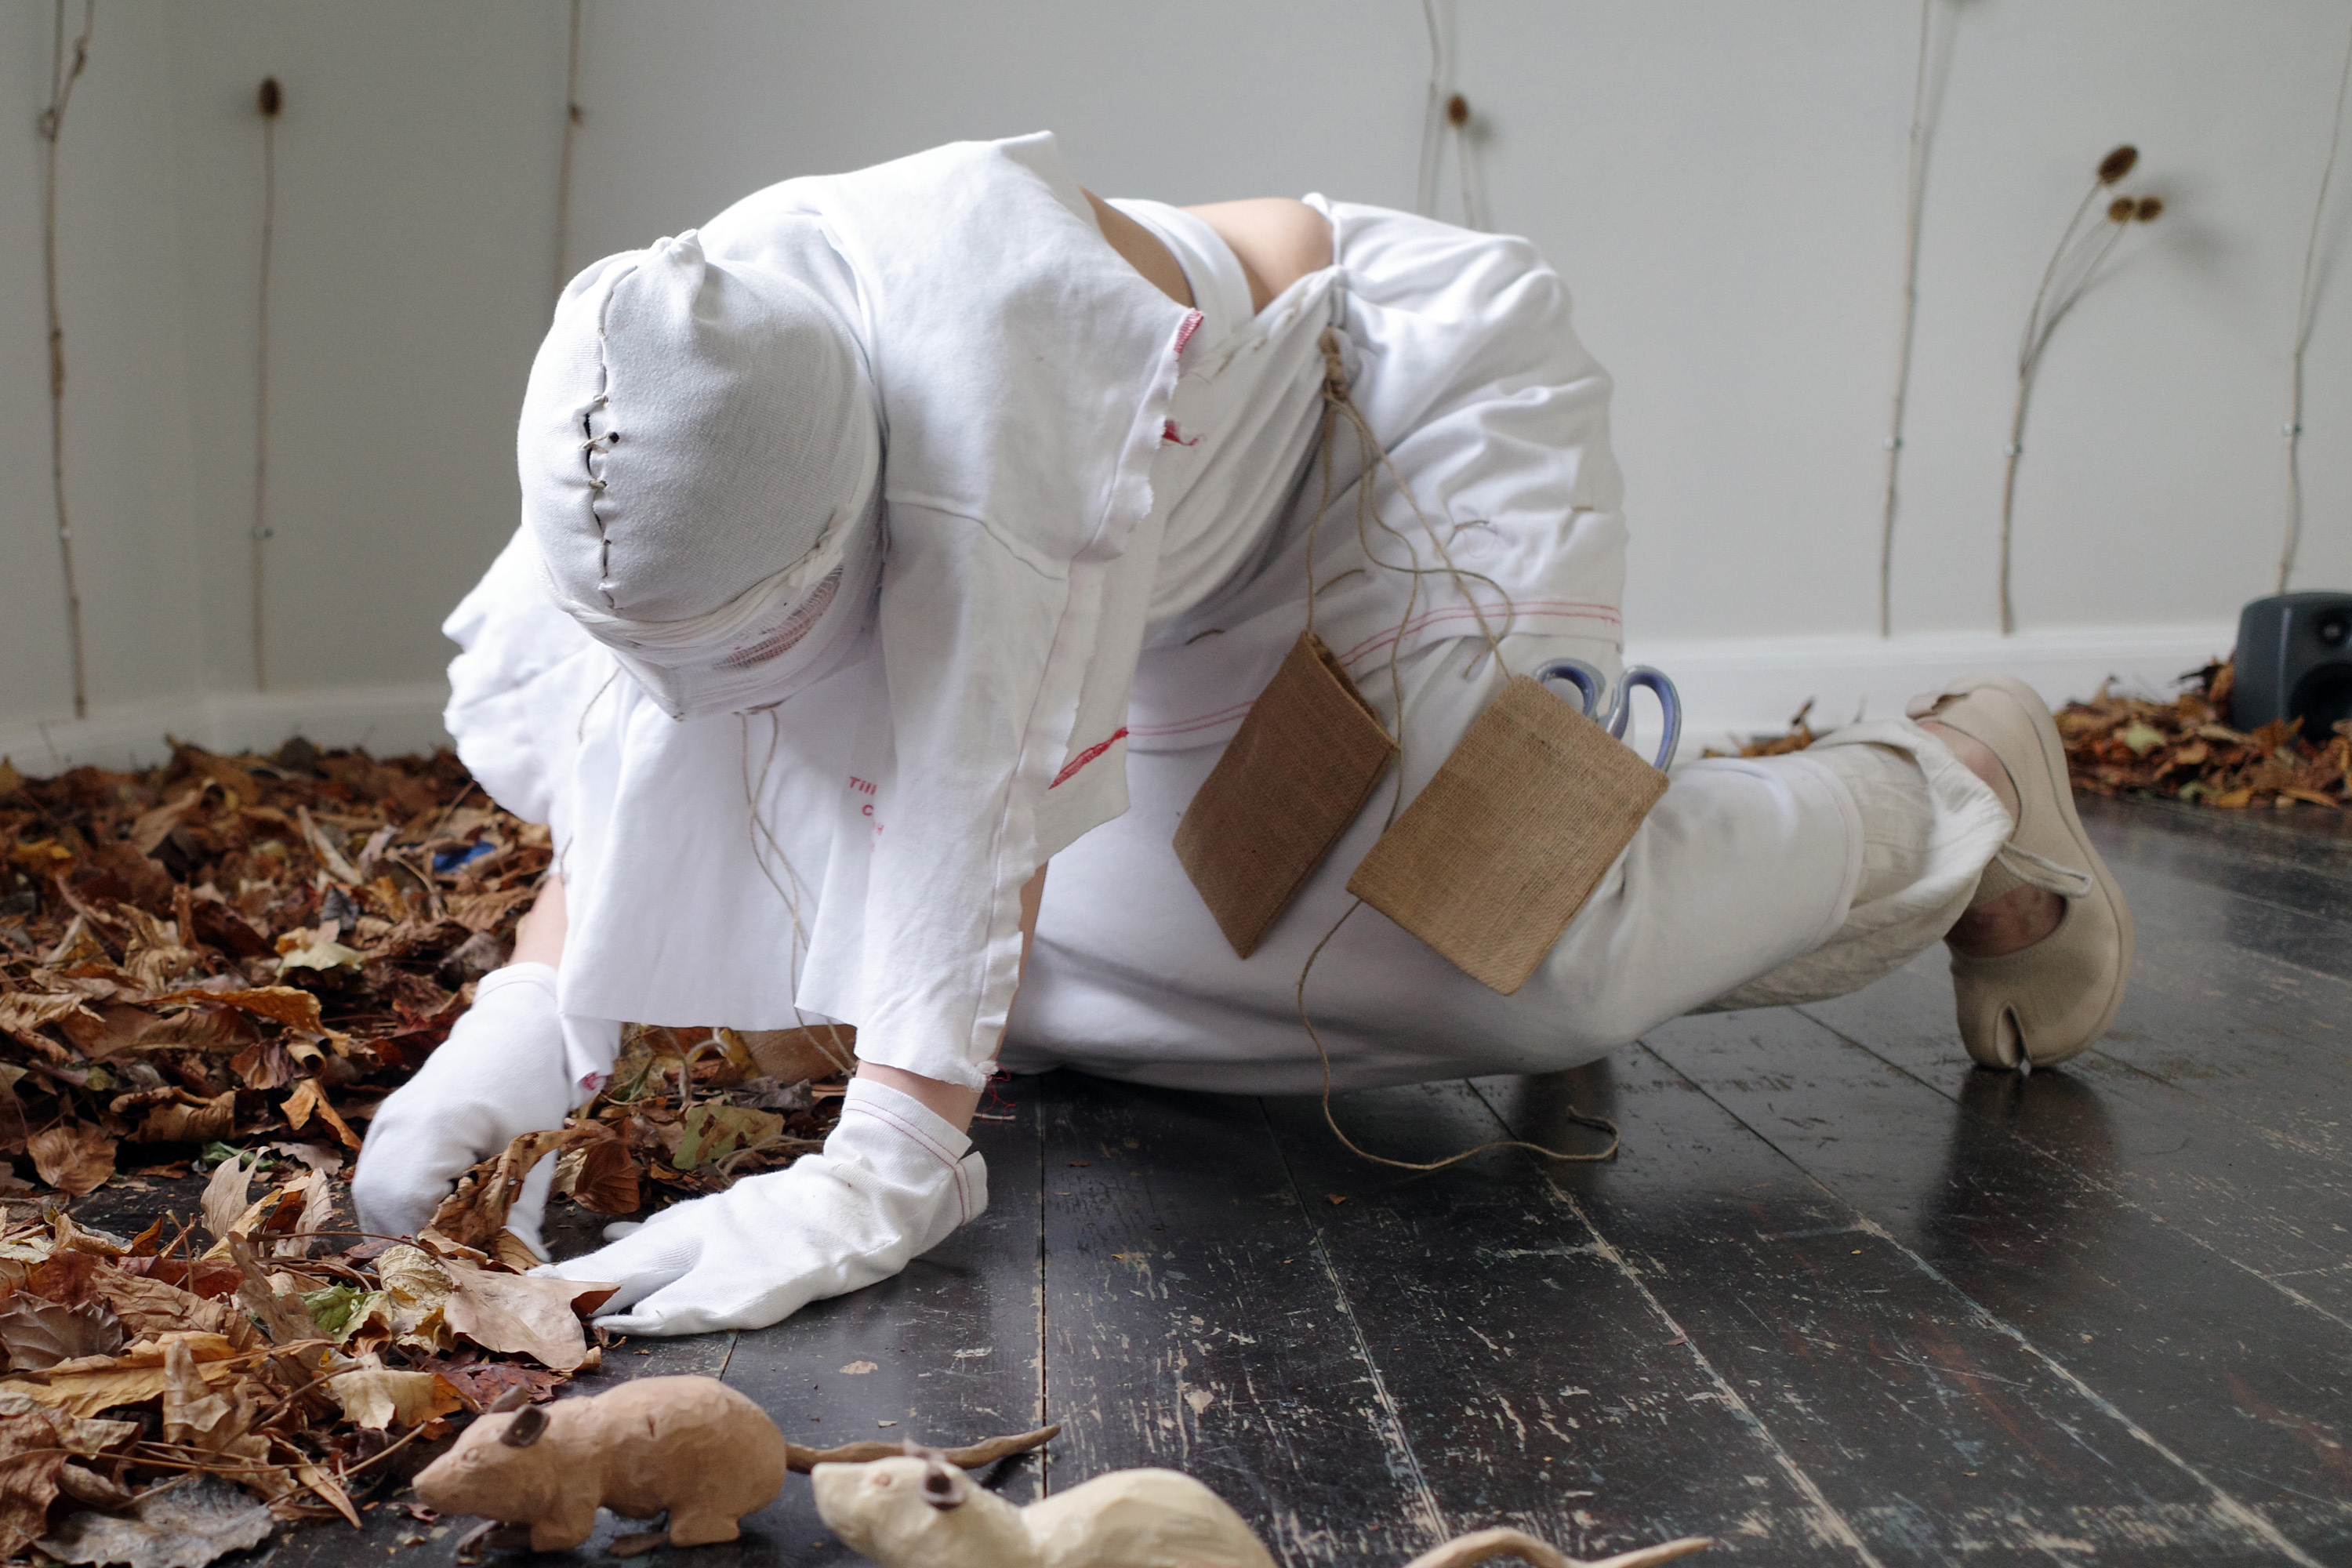 0, 2023, Anders Aarvik, Ayshan Qvortrup, Aske Hvitved. Performance (with Ayshan Qvortrup), installation of unfiltered leafs, teasels (dipsacus) attached with cable clamps, sewn patient clothes, jute, and wooden rodents (carved by Aske Hvitved)